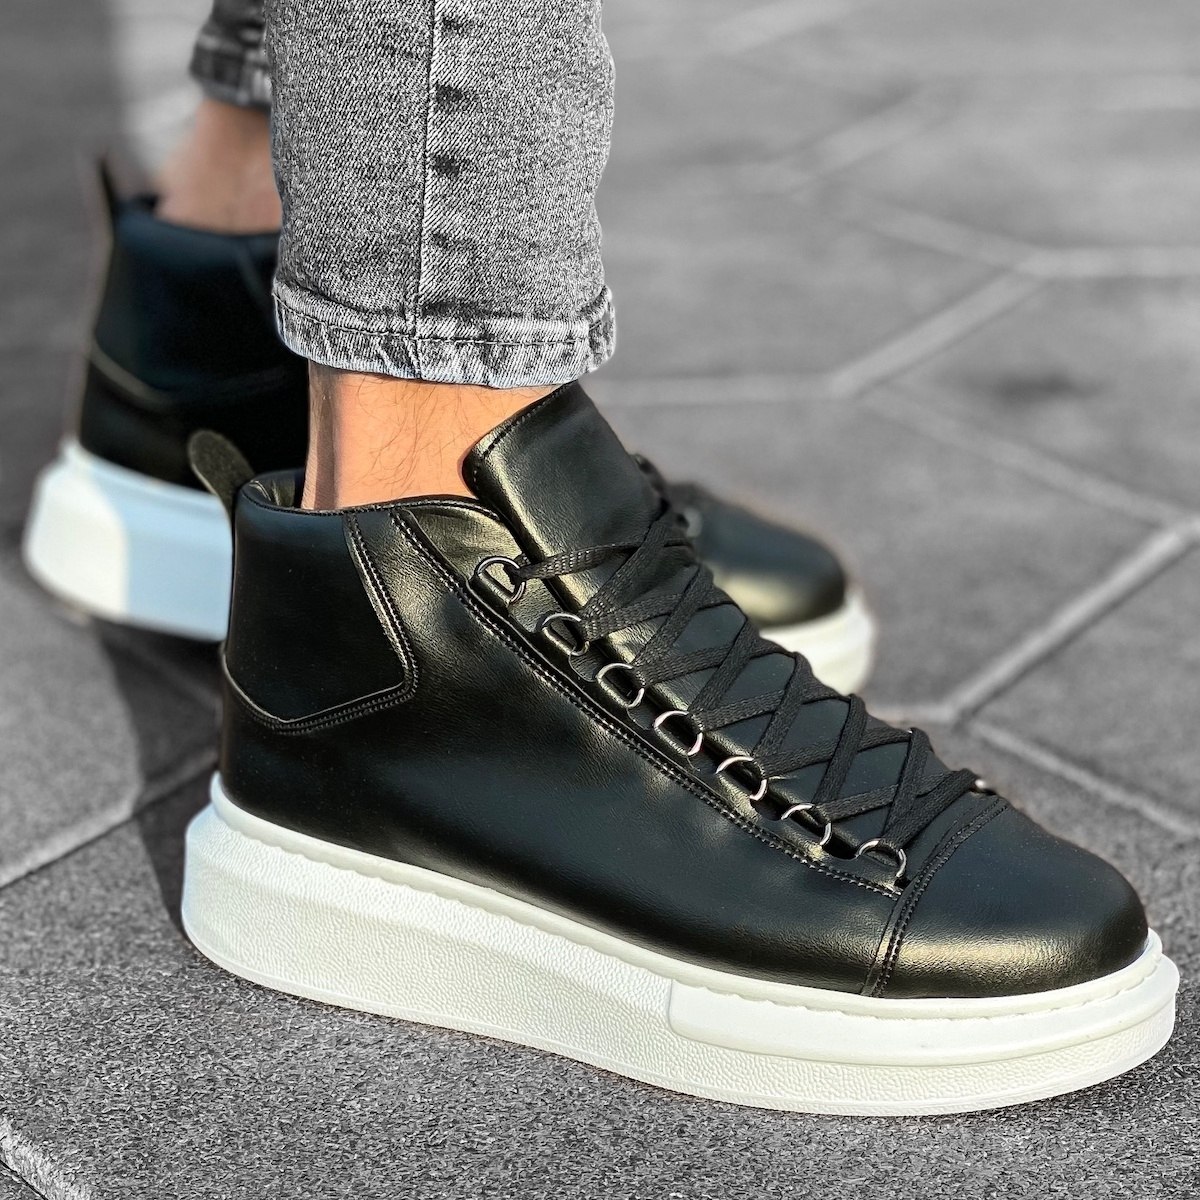 Men’s High Top Sneakers Shoes Black-White